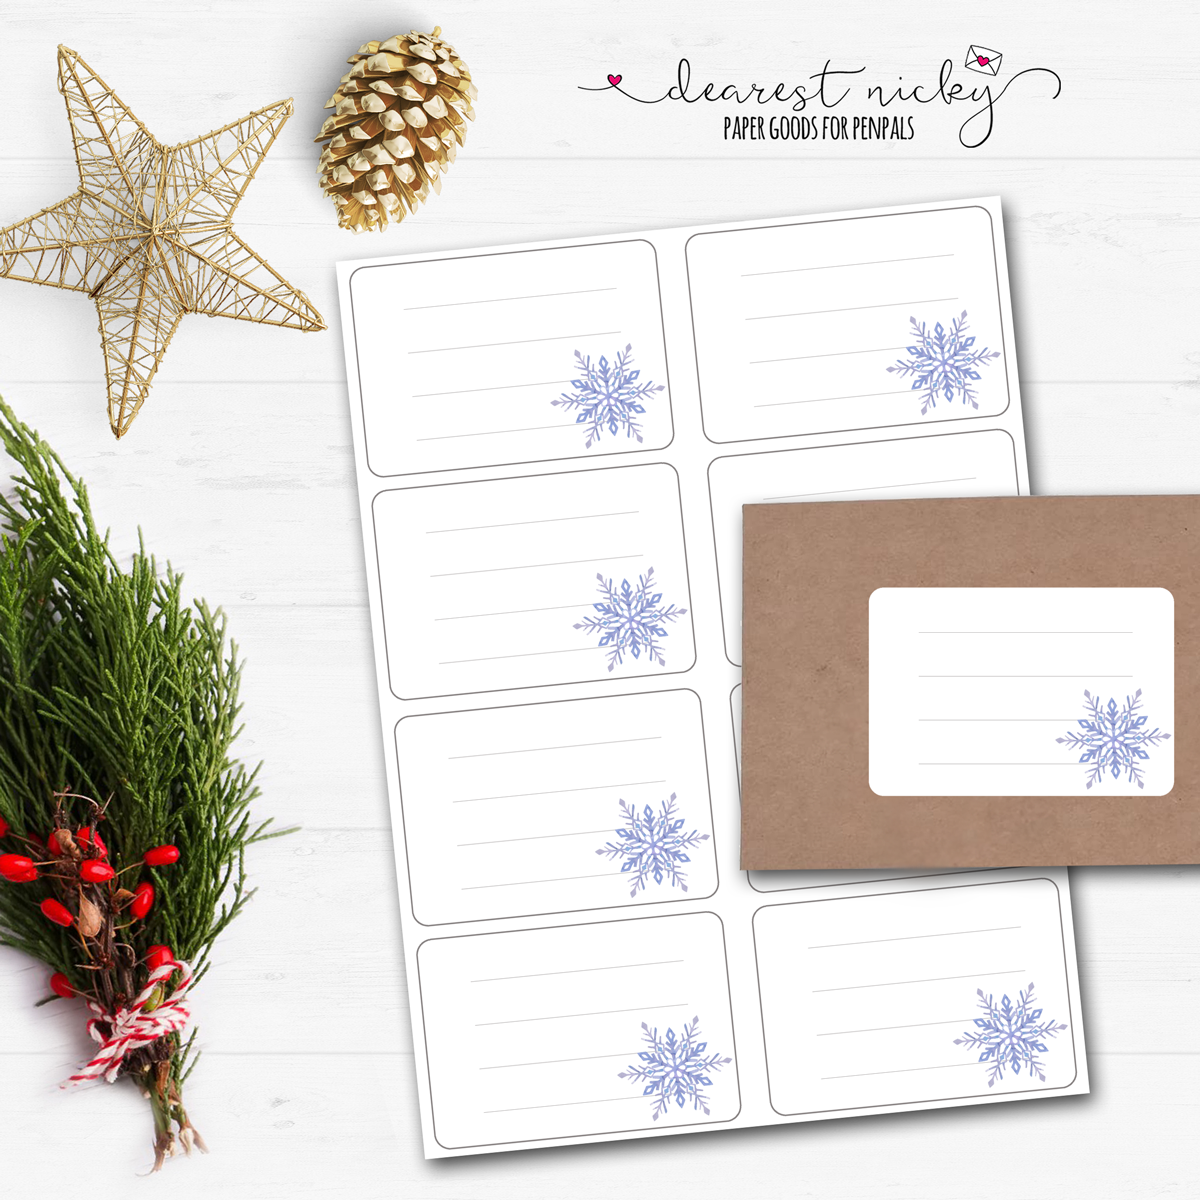 Snowflakes Mailing Address Labels - Set of 16